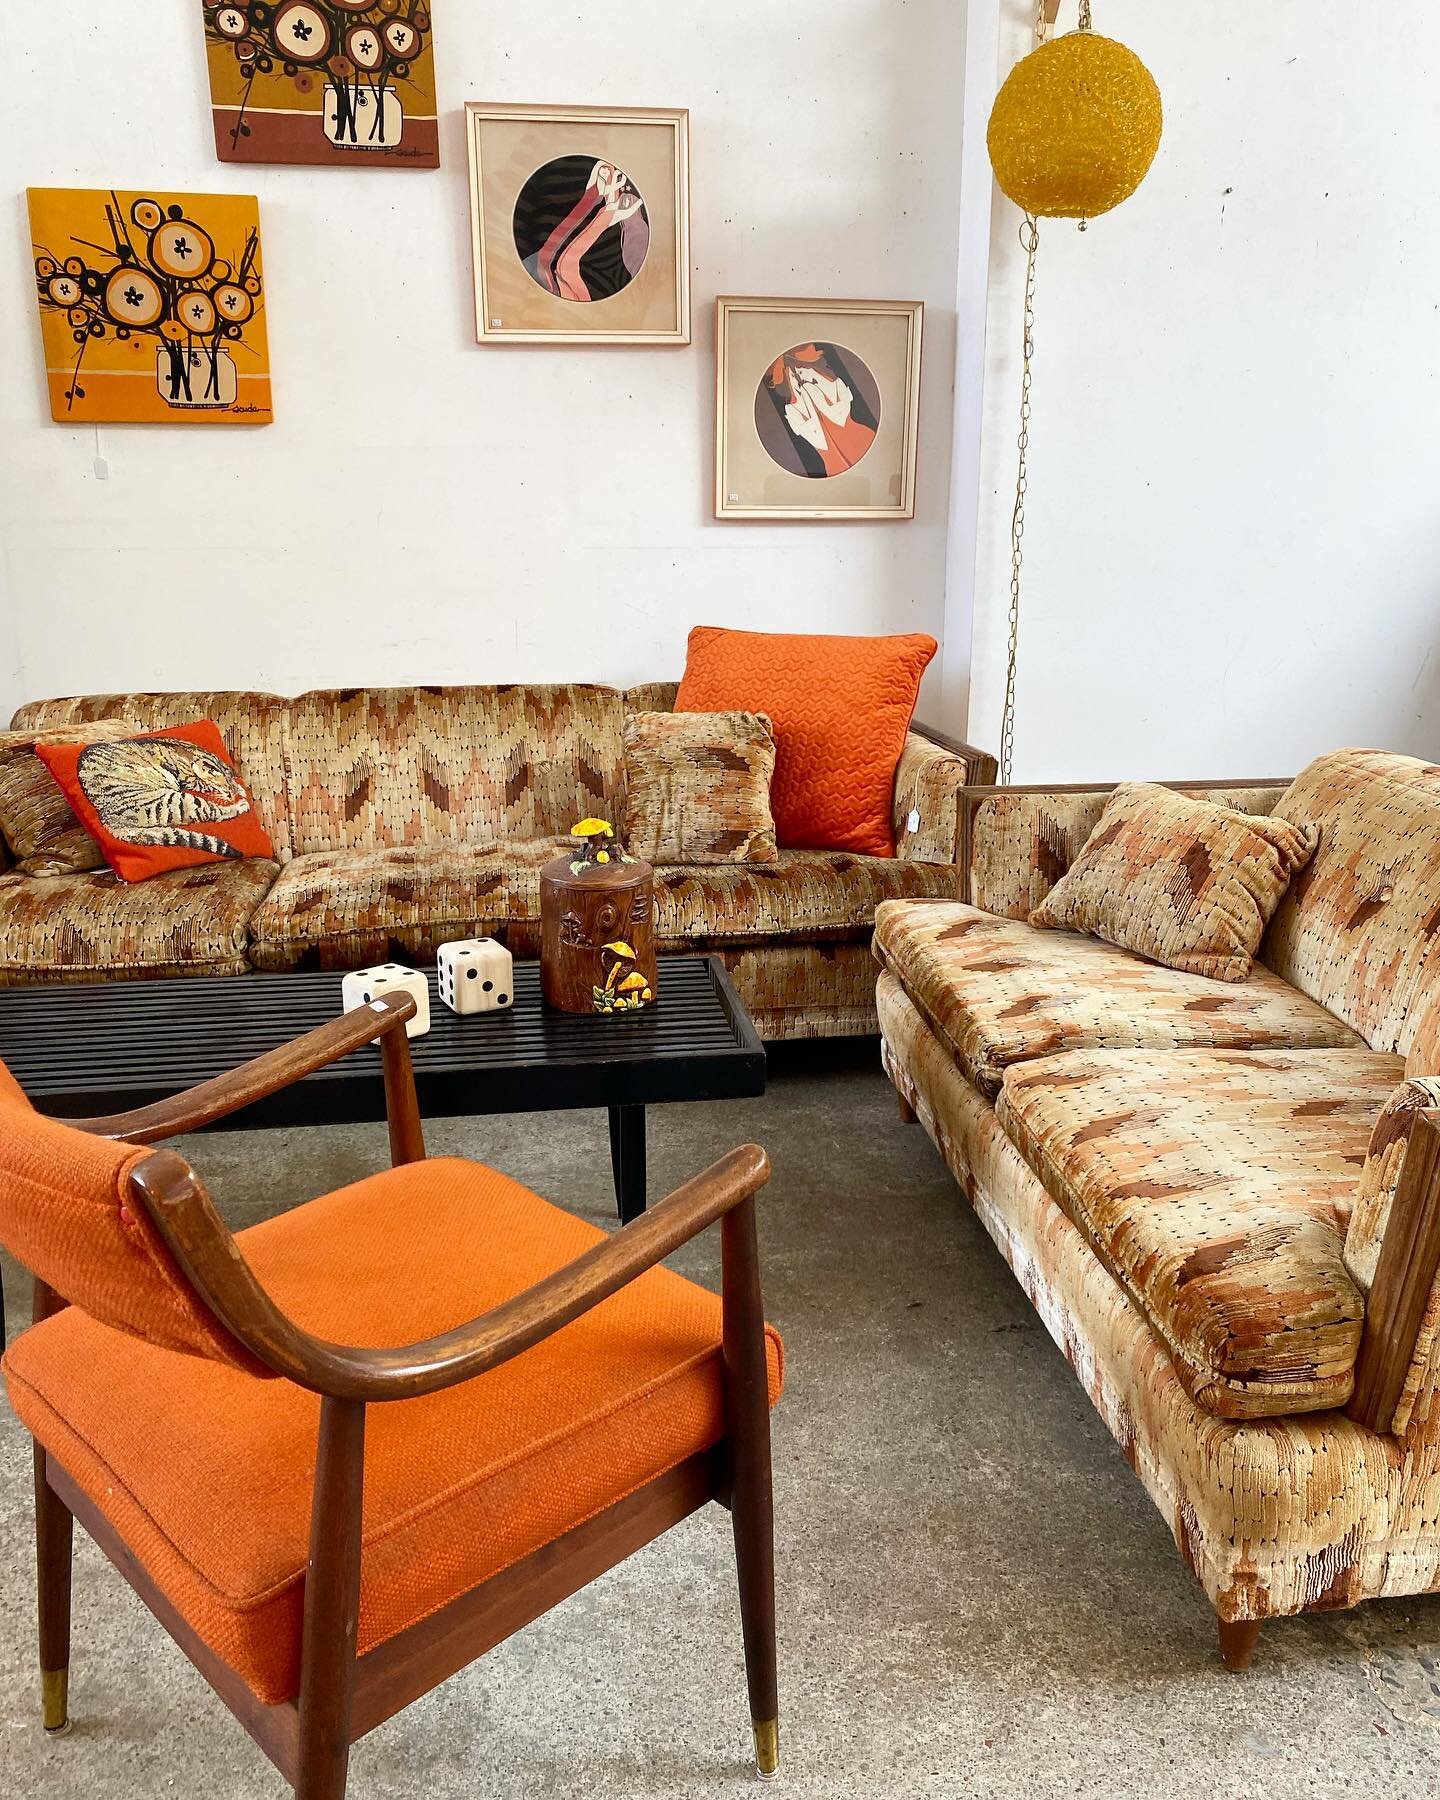 Feeling groovy✌🏻 70s and sunny here in Greenpoint with this sofa set. 
70s Print Sofa (84&rdquo;L x 36&rdquo; D x 16&rdquo; SH x 28&rdquo;H)- $850
70s Print Loveseat (60&rdquo; L x 36&rdquo; D x 16&rdquo; SH 28&rdquo; H -$650
Black Slat Bench (48&rd